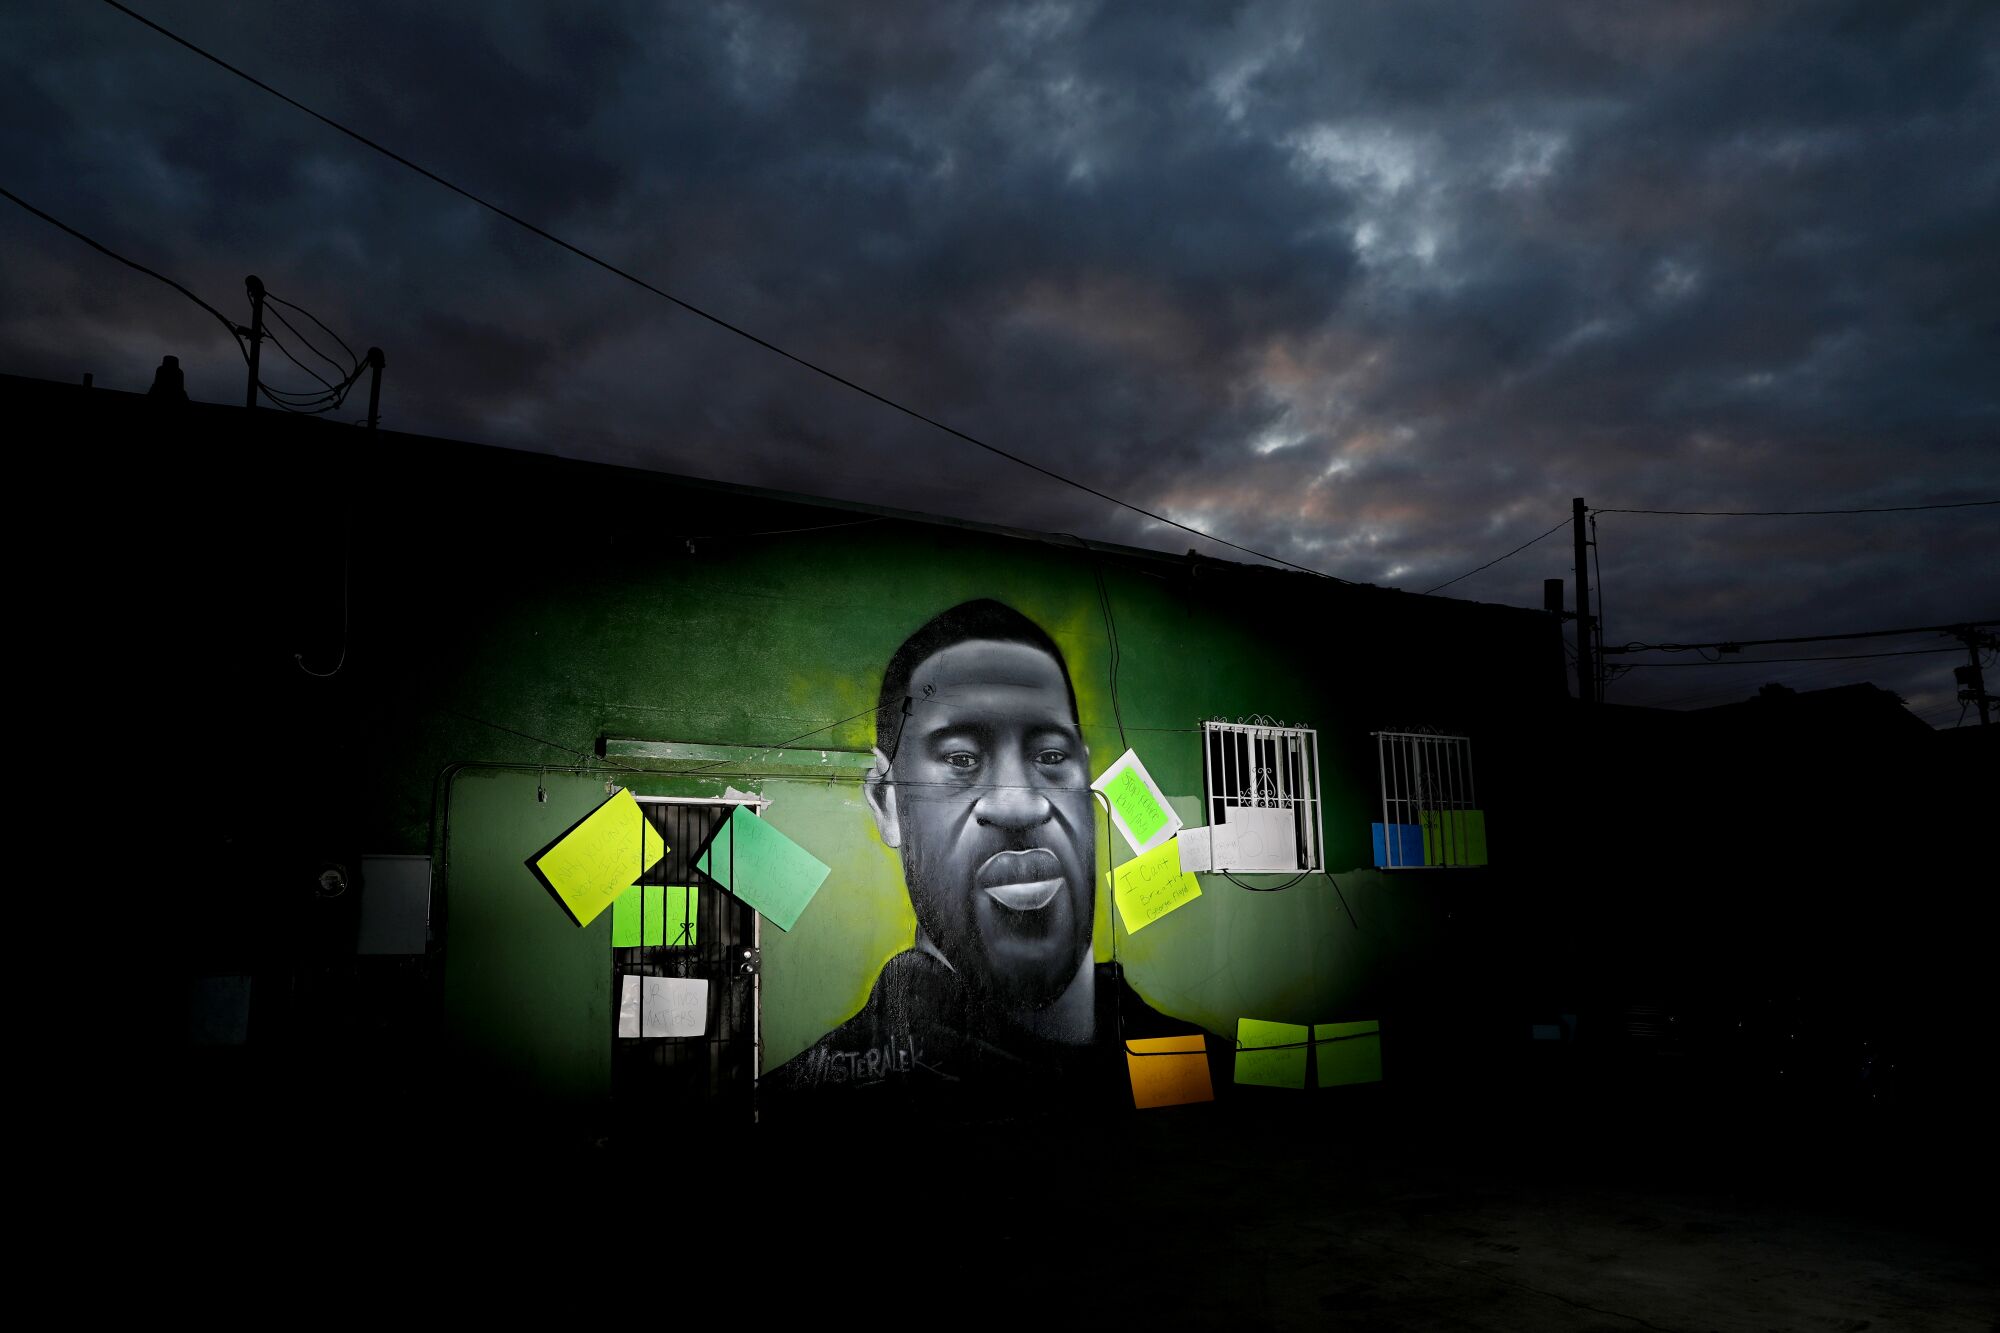 Artists memorialize George Floyd, who was killed by a Minneapolis policeman, with a mural in Watts.